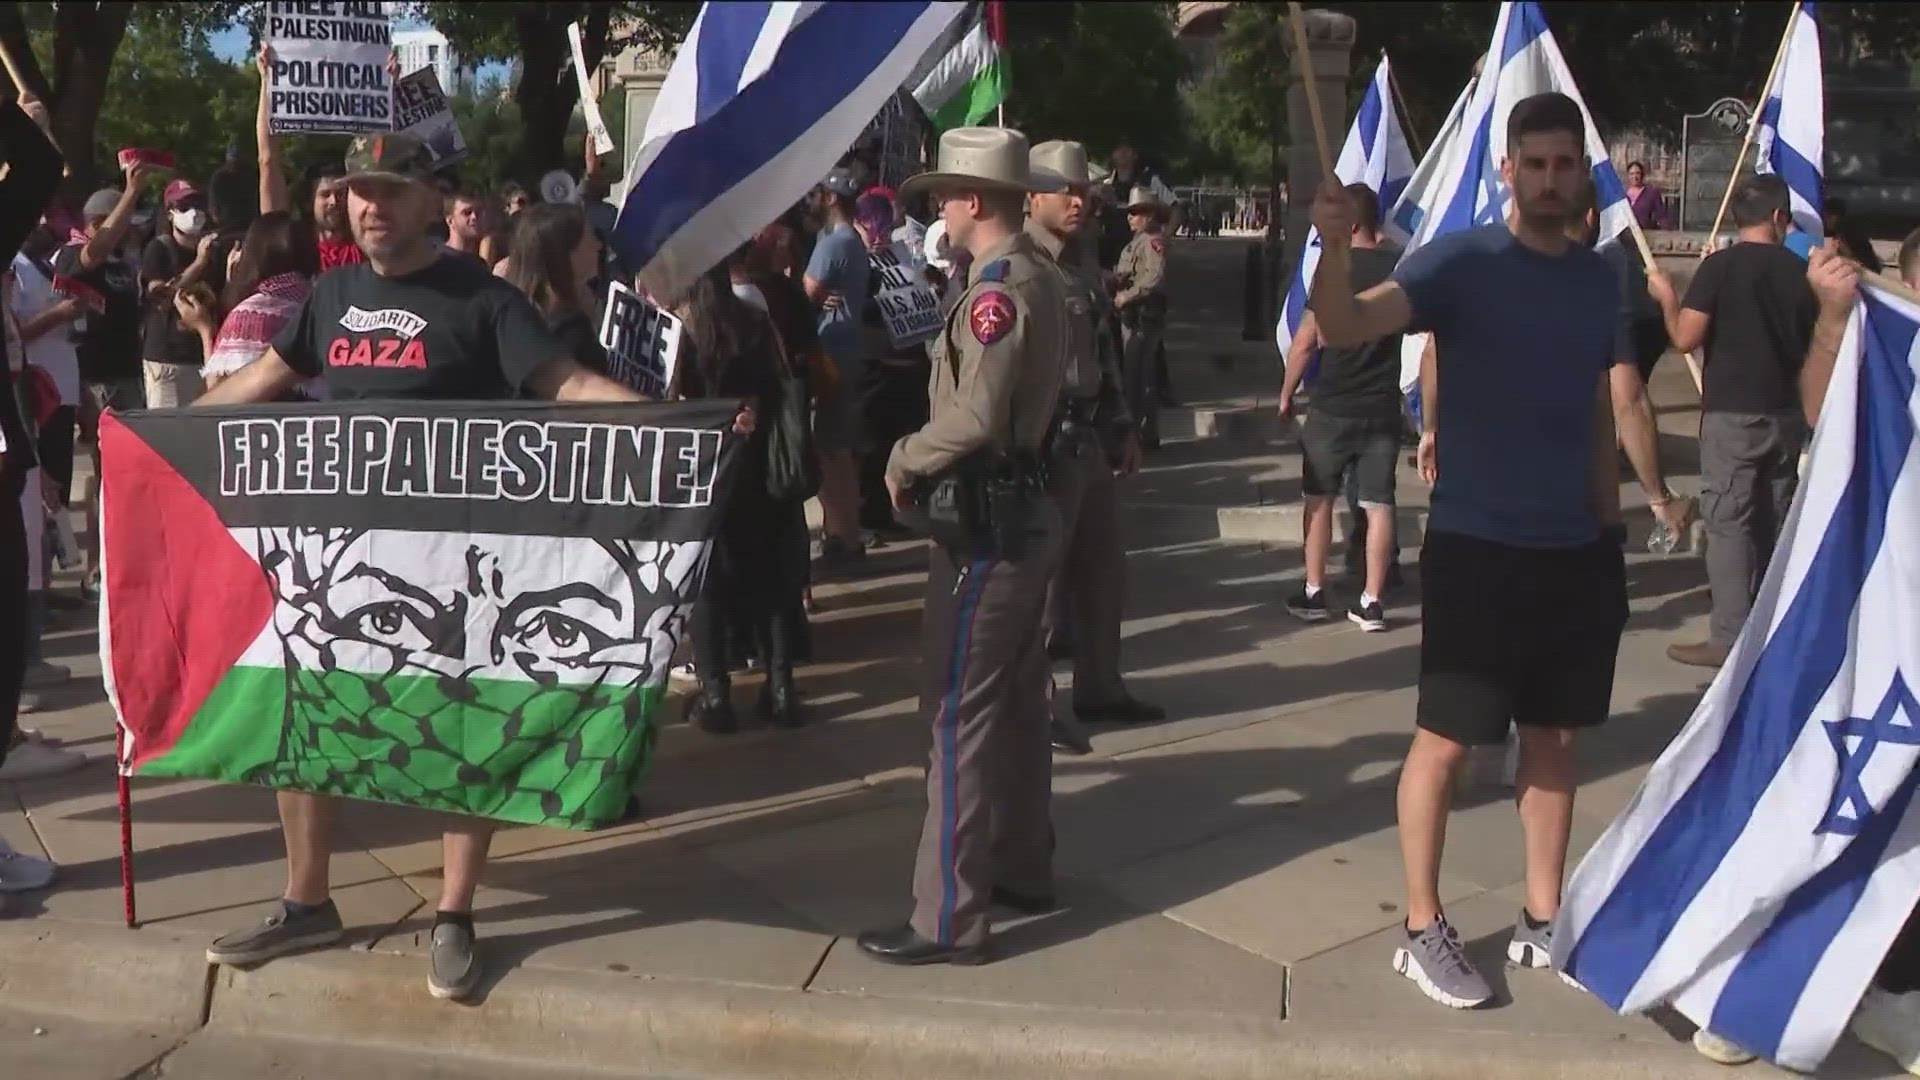 Supporters of Palestine and of Israel made their voices heard at rallies across the nation, including here in Austin.